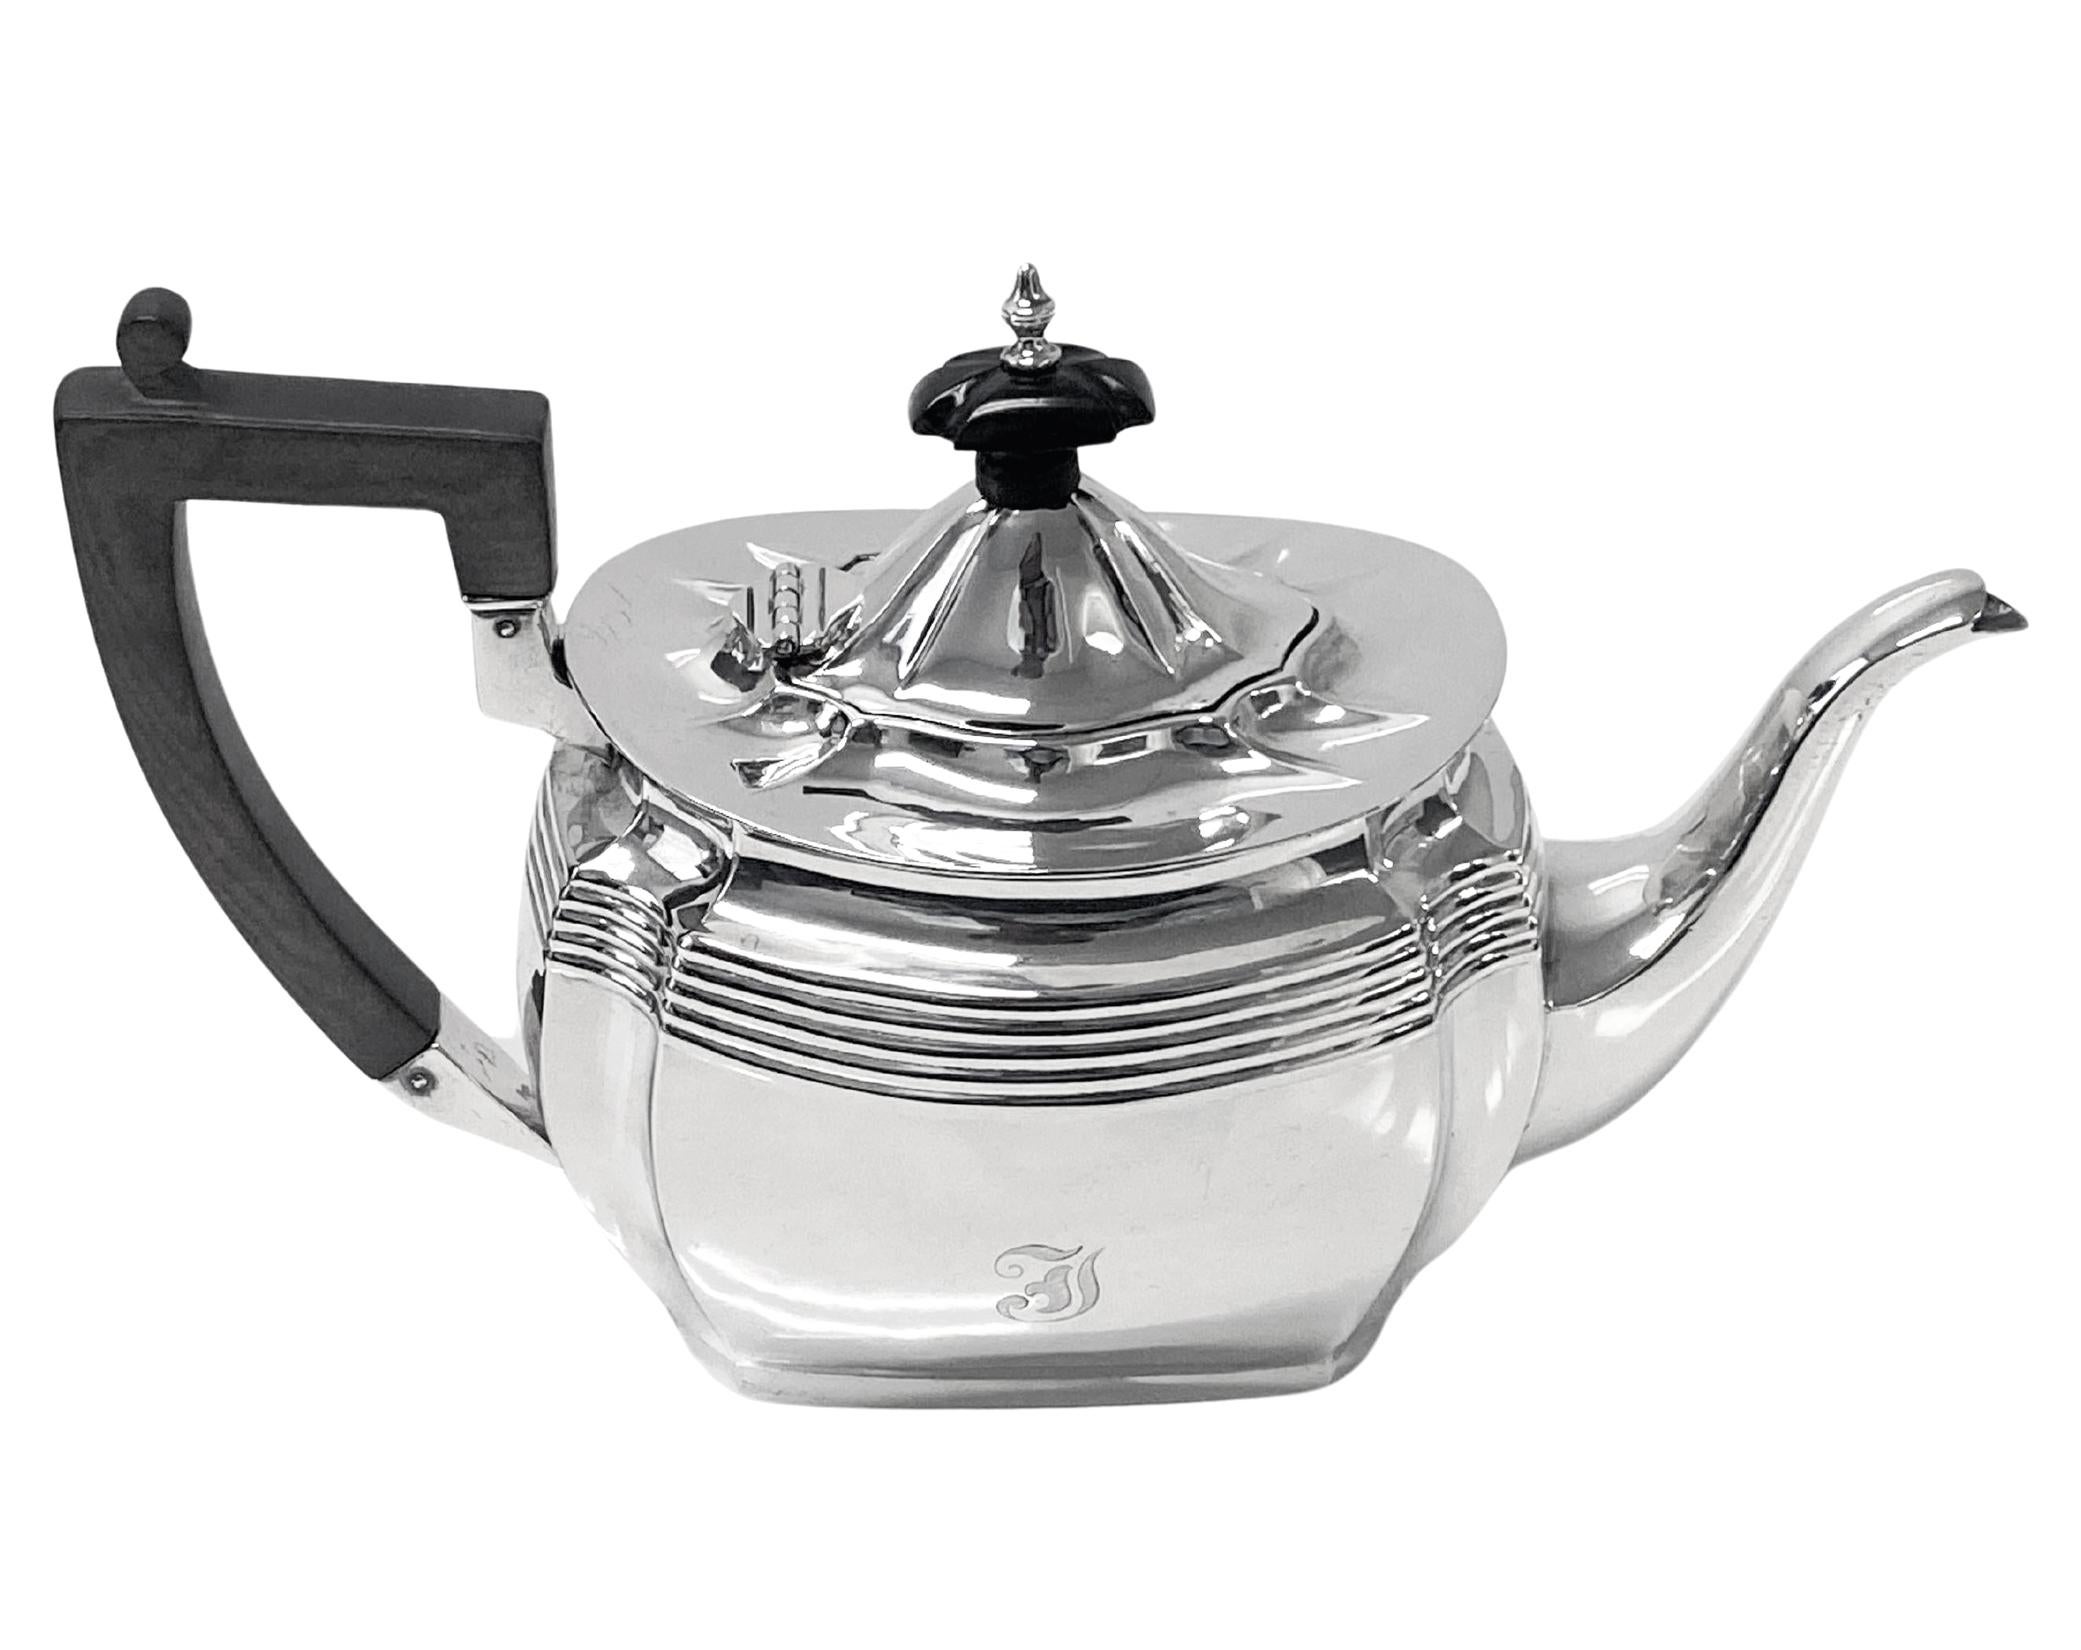 Antique Canadian Sterling silver Teapot Toronto C.1900 Roden Bros. The teapot of plain ribbed design oval rounded form, collet style base. The upper body of the teapot is ribbed with horizontal bands. The shaped waisted shoulders of the teapot